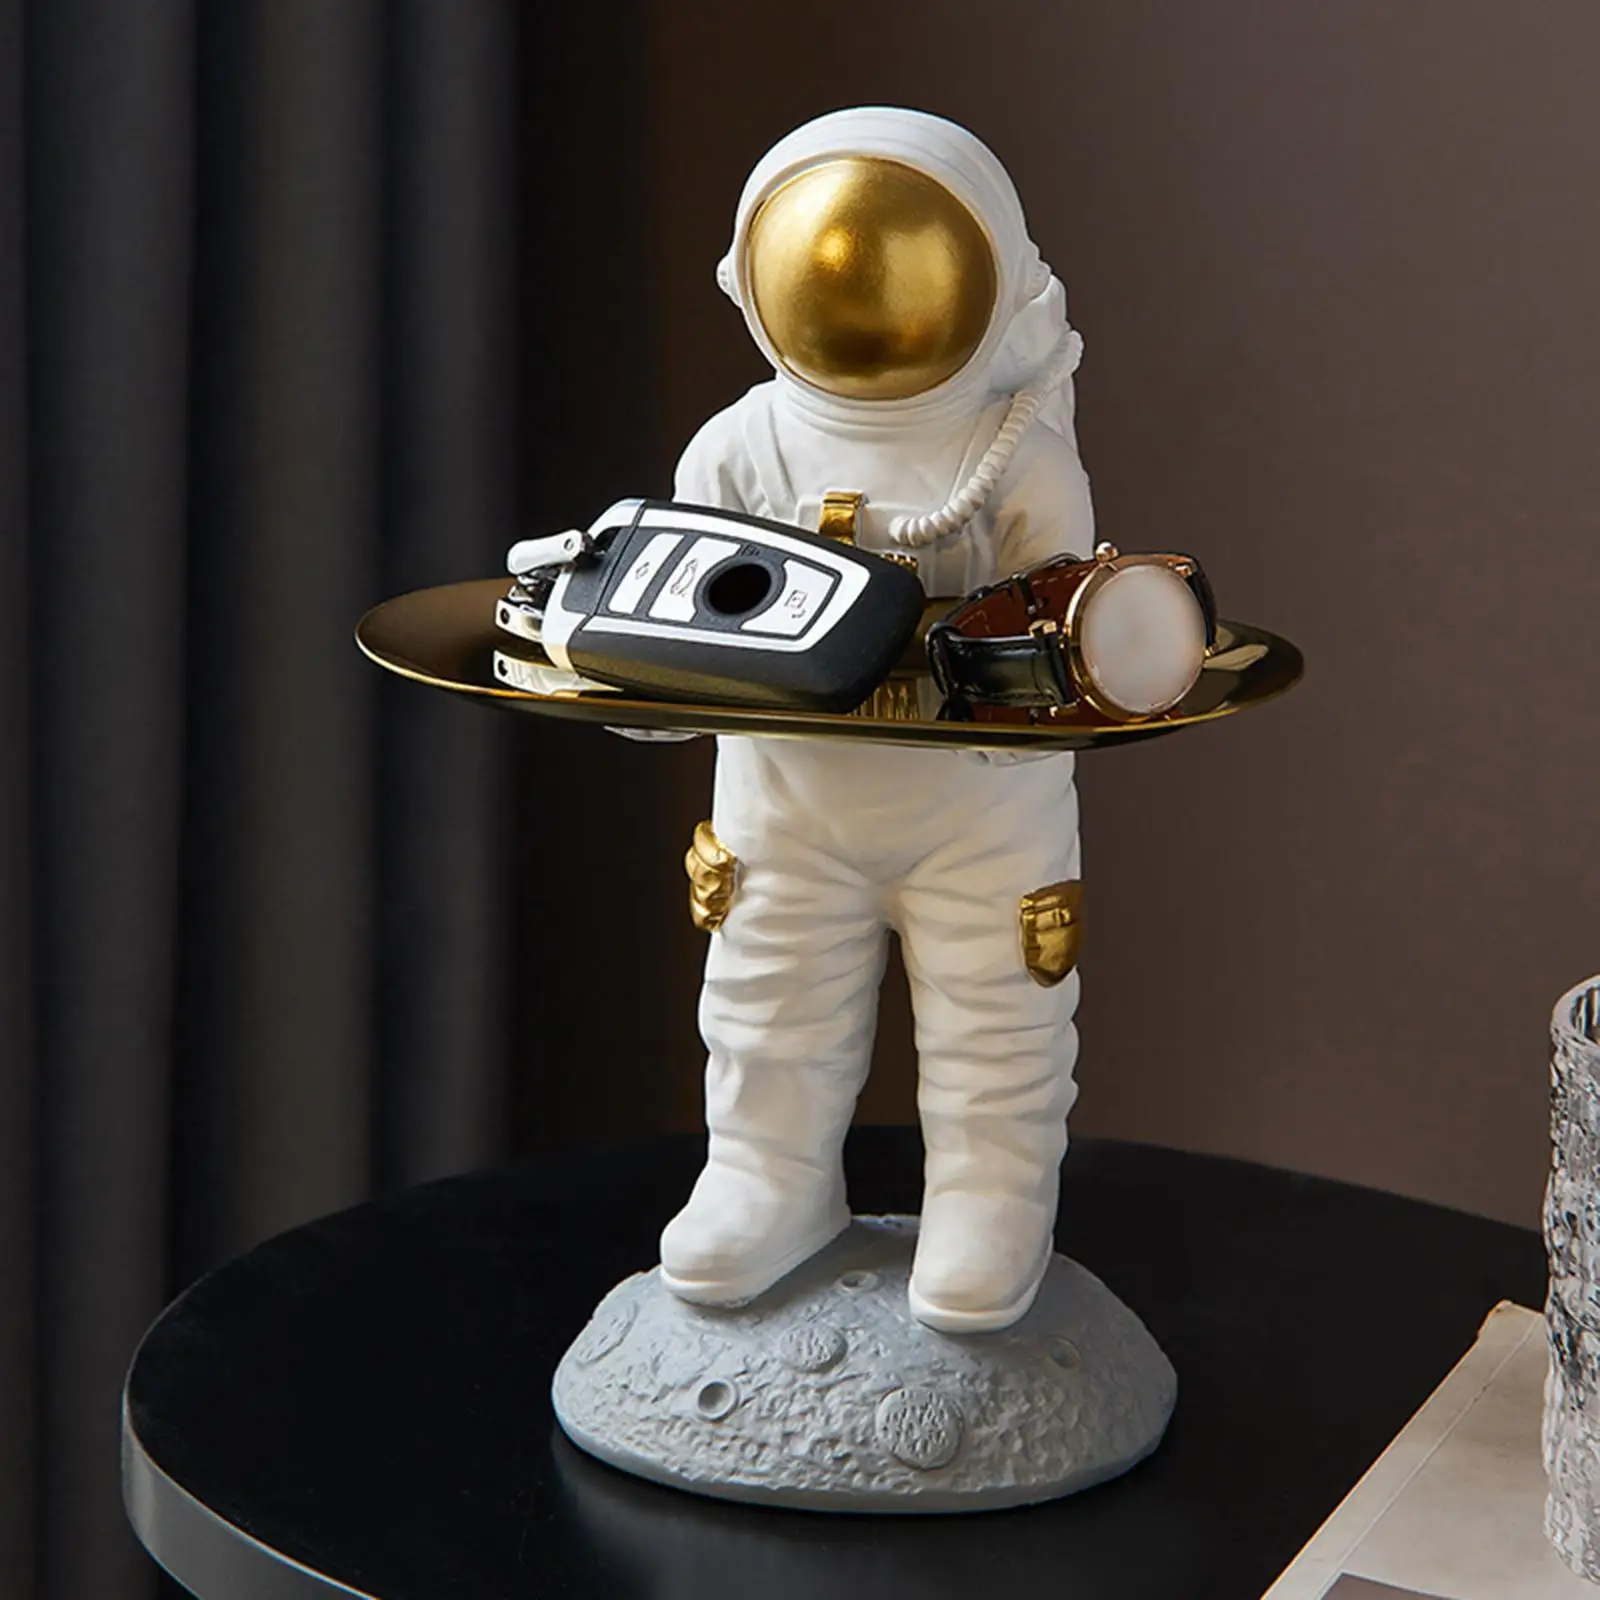 Resin Astronaut Sculptures Decorative Tray Tabletop Porch Cafe Party Entrance Hotel Creative Spaceman Figurines Statues Decor